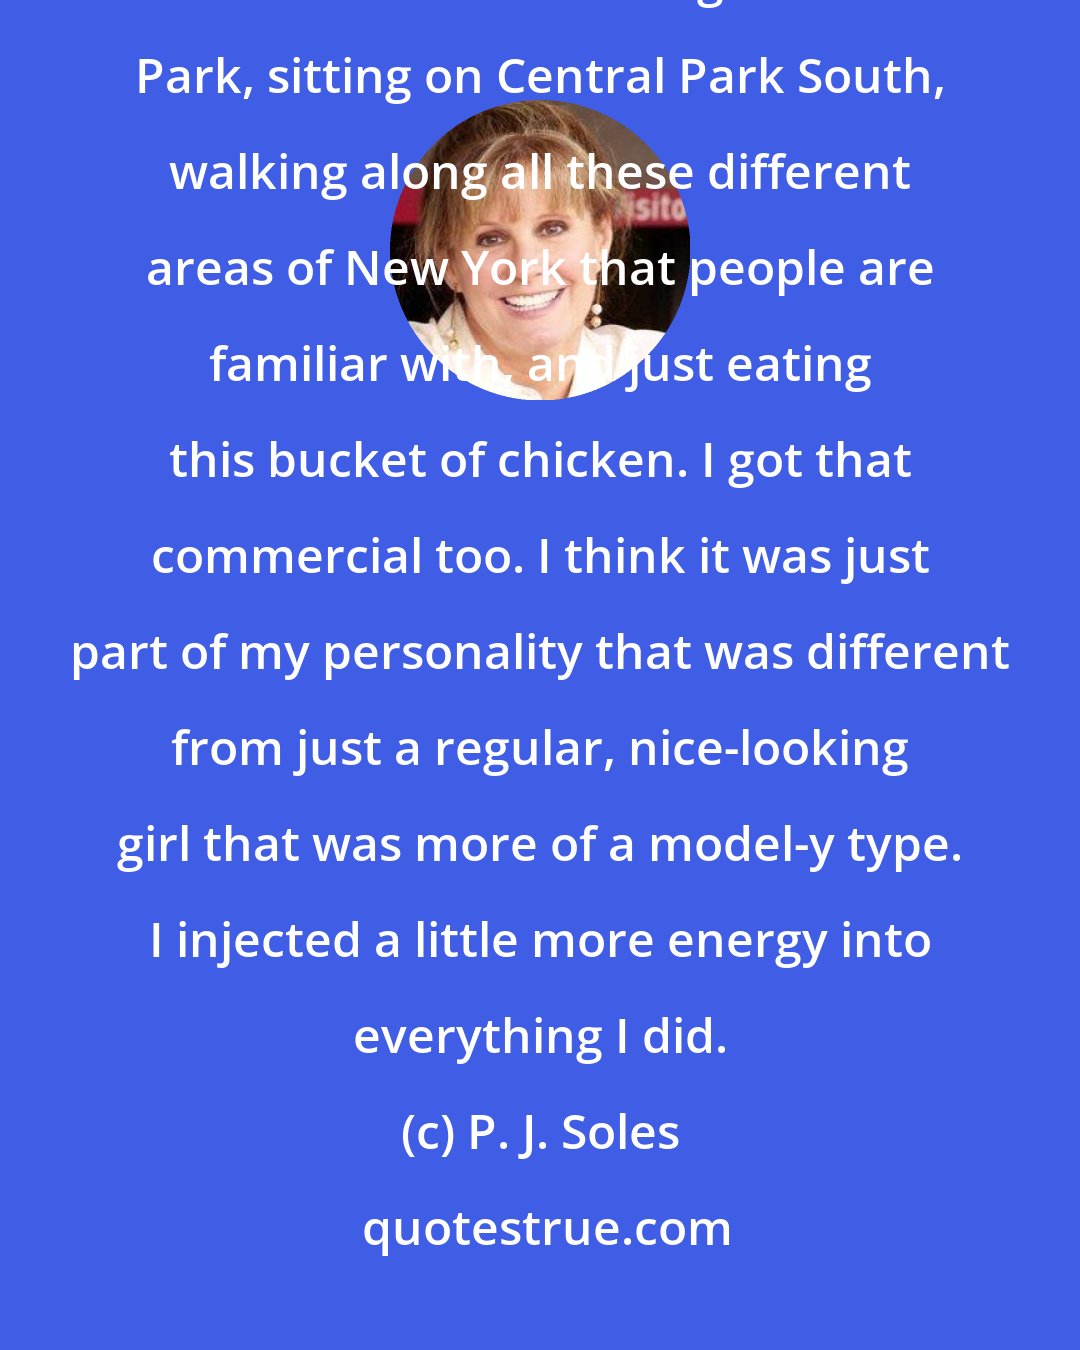 P. J. Soles: For Coca-Cola, they wanted a hippie-looking girl to walk around the city with a bucket of chicken sitting in Central Park, sitting on Central Park South, walking along all these different areas of New York that people are familiar with, and just eating this bucket of chicken. I got that commercial too. I think it was just part of my personality that was different from just a regular, nice-looking girl that was more of a model-y type. I injected a little more energy into everything I did.